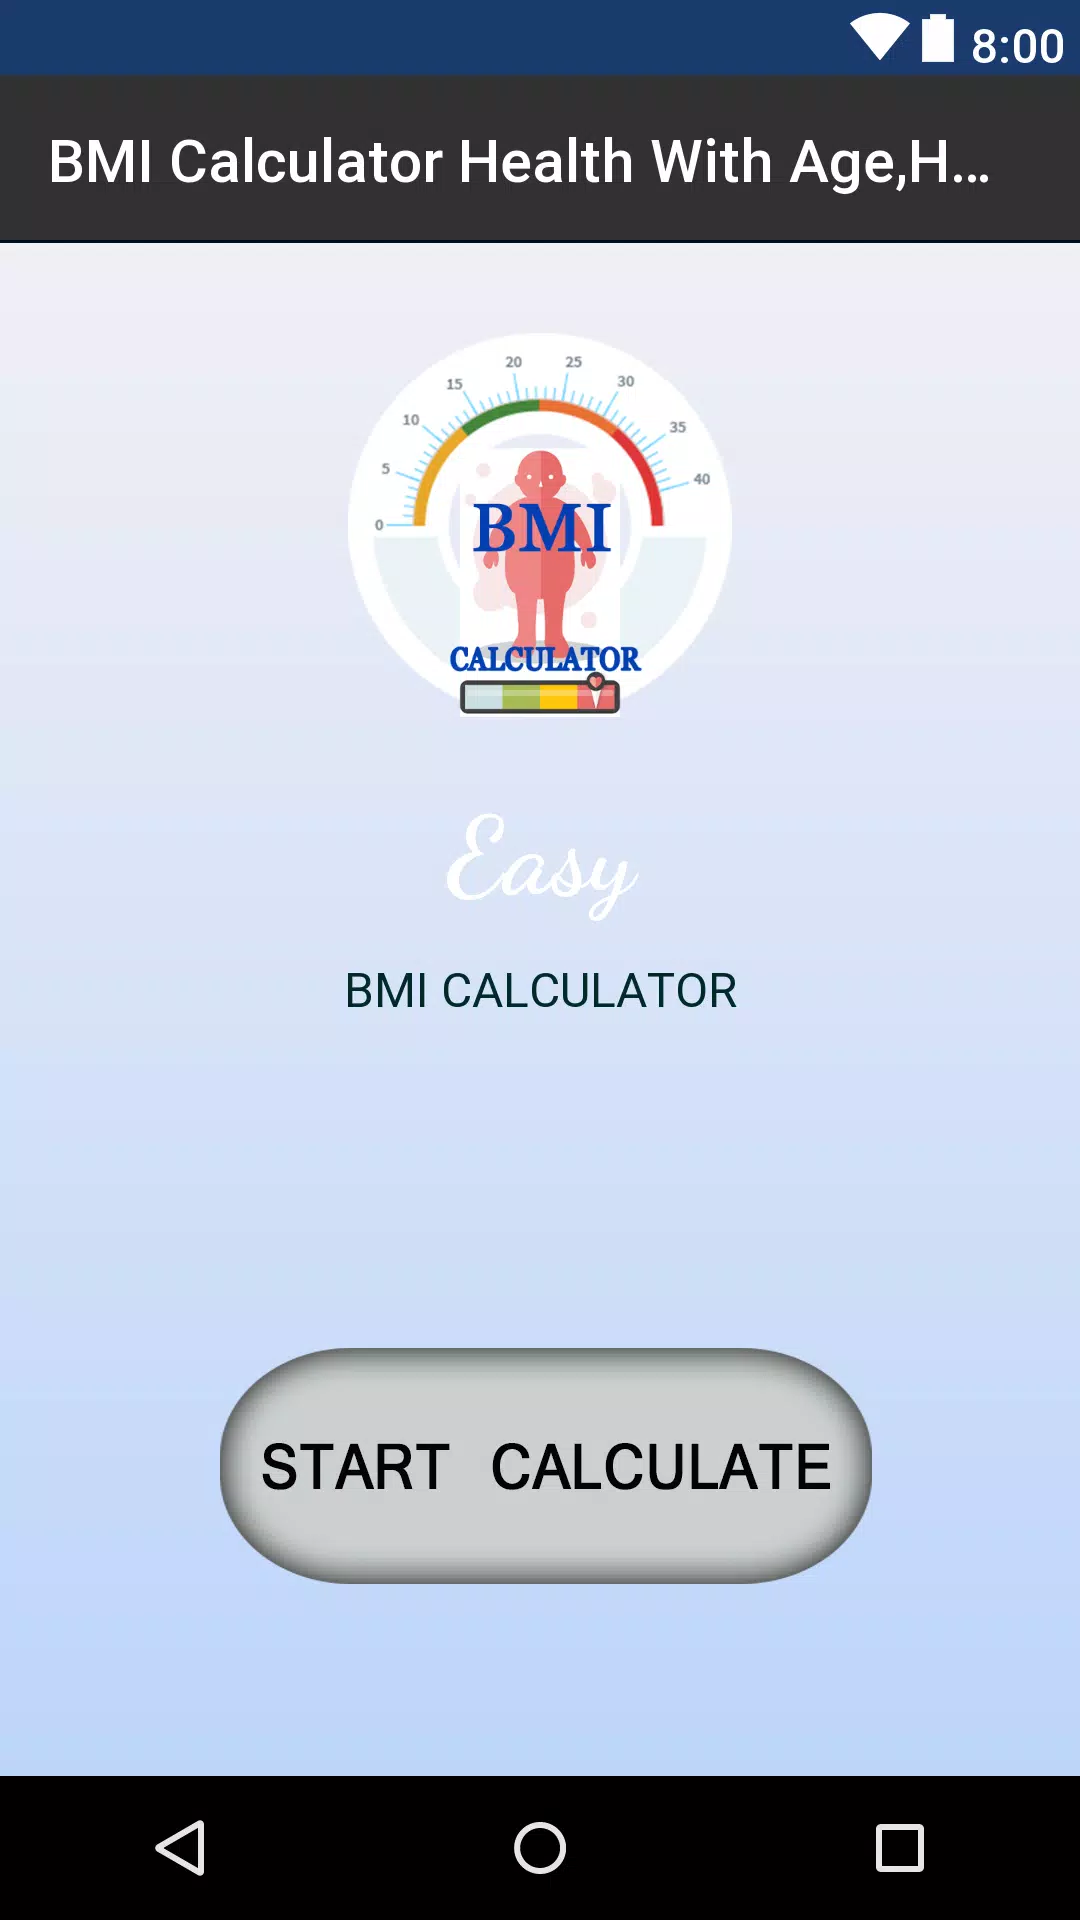 BMI Calculator Health With Age & Height APK pour Android Télécharger